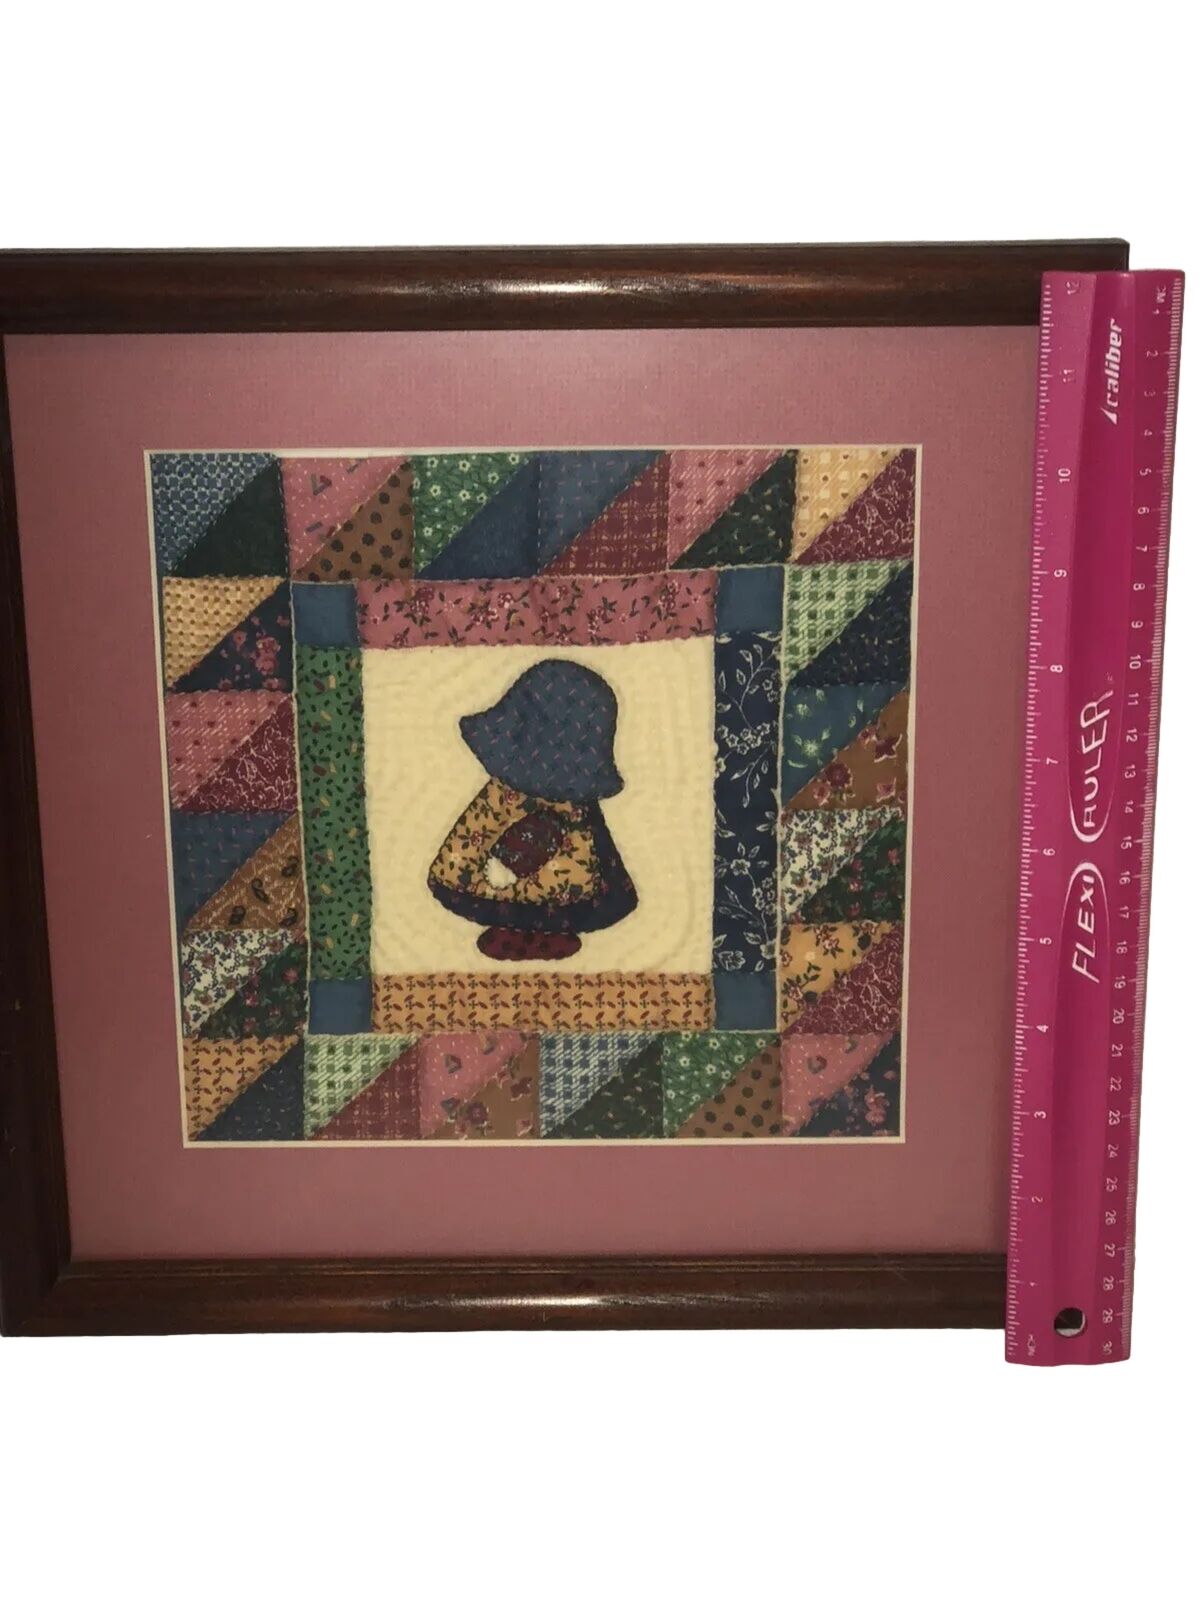 Vintage Quilt Square  Bonnet Baby Framed Wall Art Hanging ￼farmhouse Fun